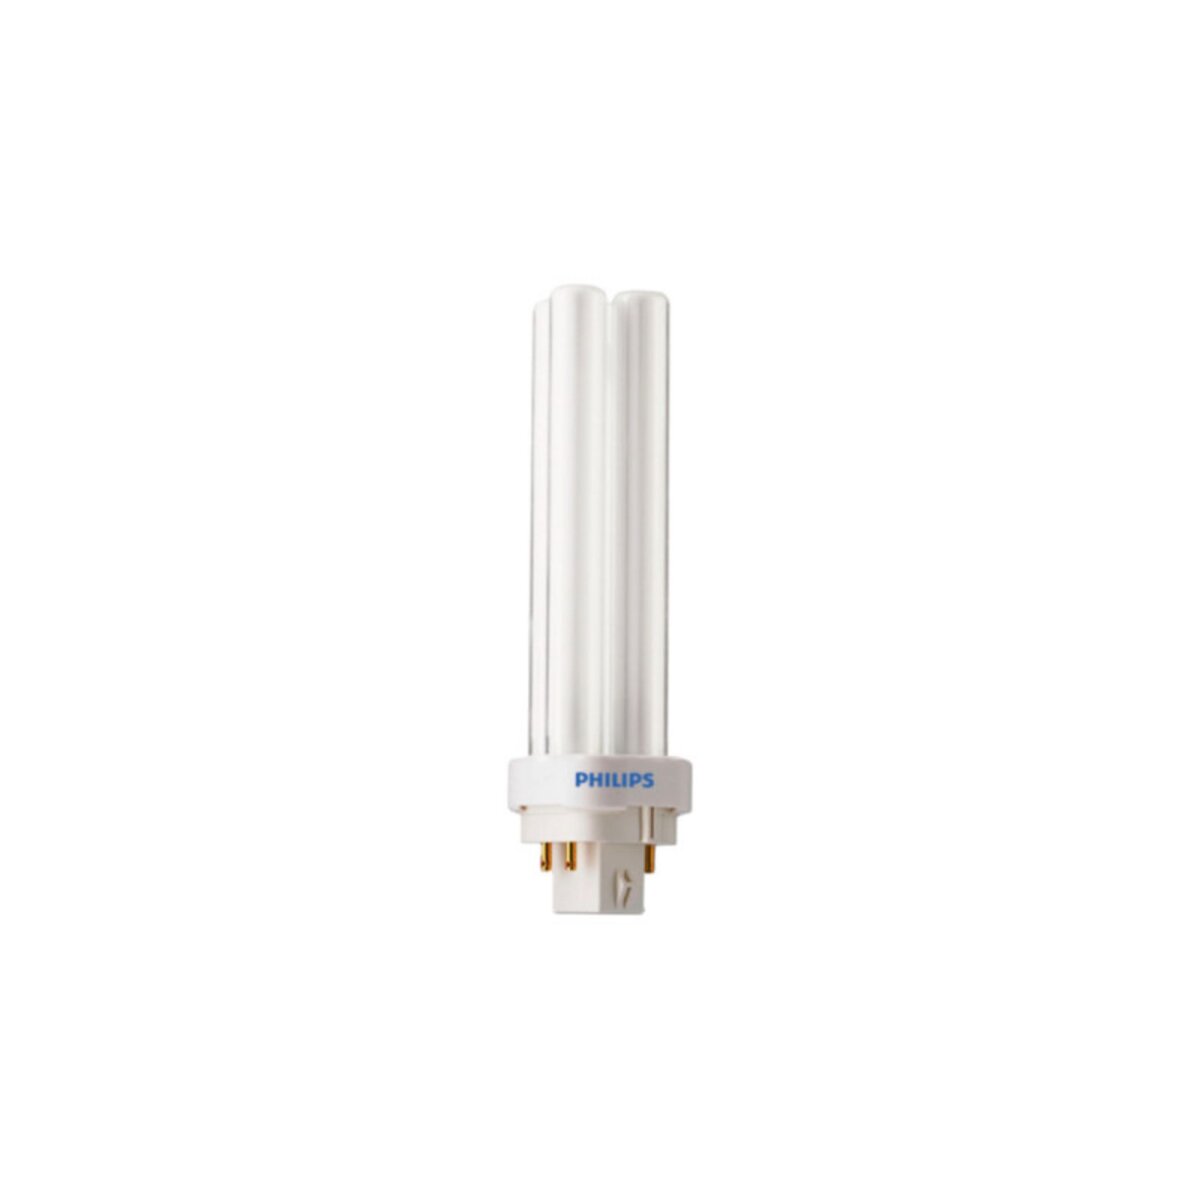 Philips Ampoule PHILIPS basse consommation - 1800 Lumens - 3000 K - G24q-3 - 26W